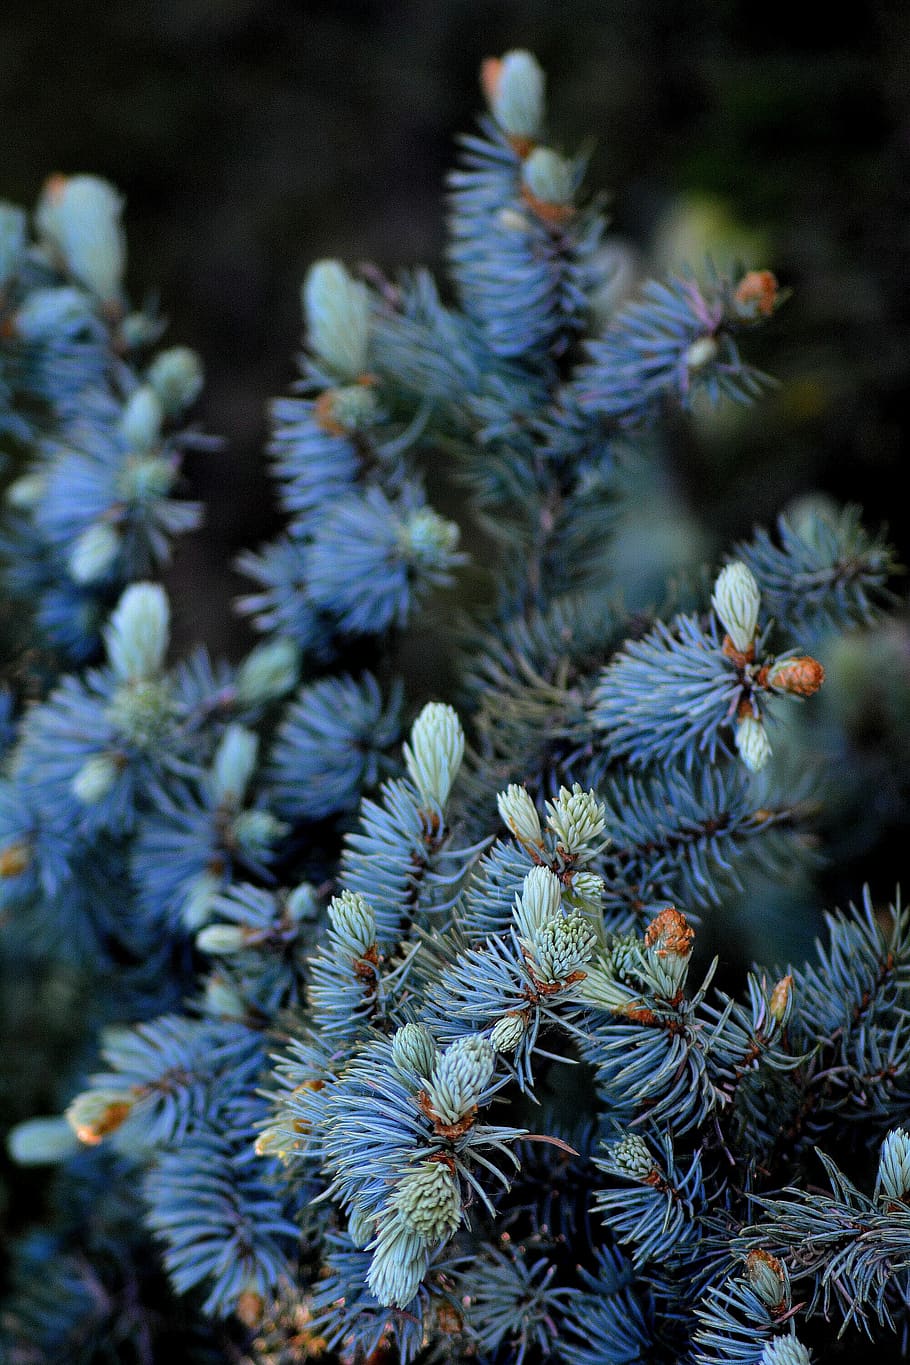 spring, spruce, blue, update, growth, plant, close-up, focus on foreground, day, nature